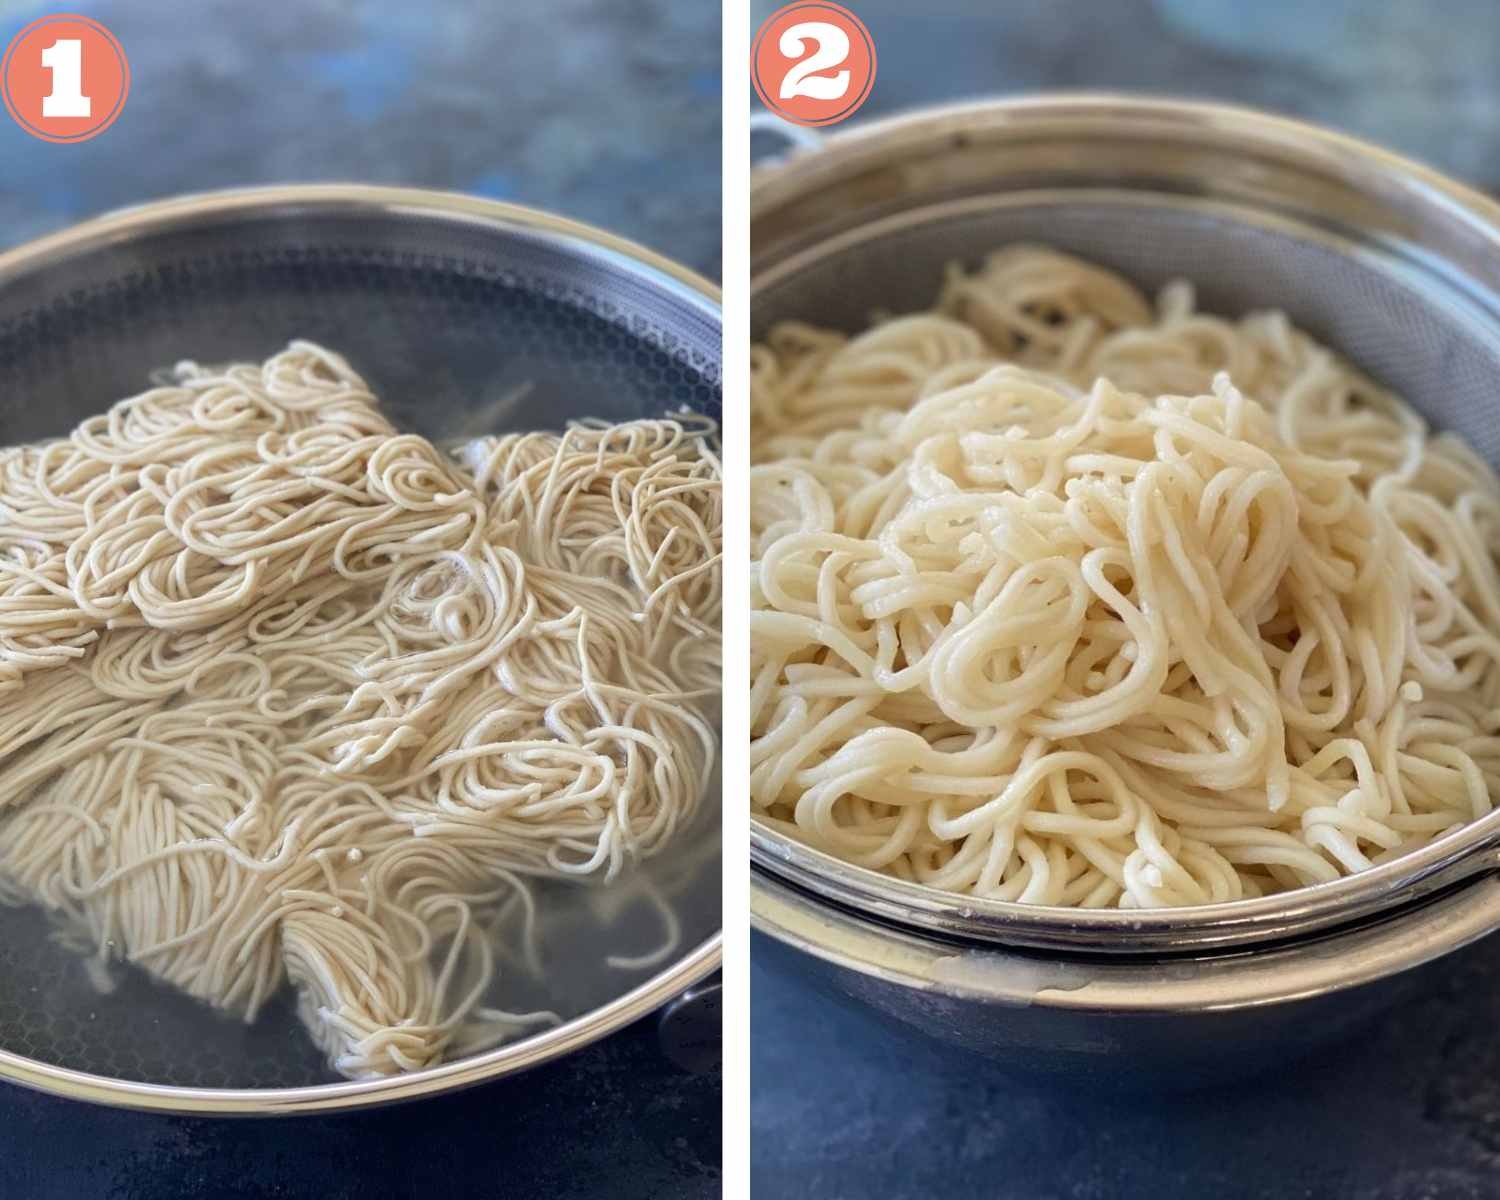 Cook the noodles as per packet instructions and drain well.